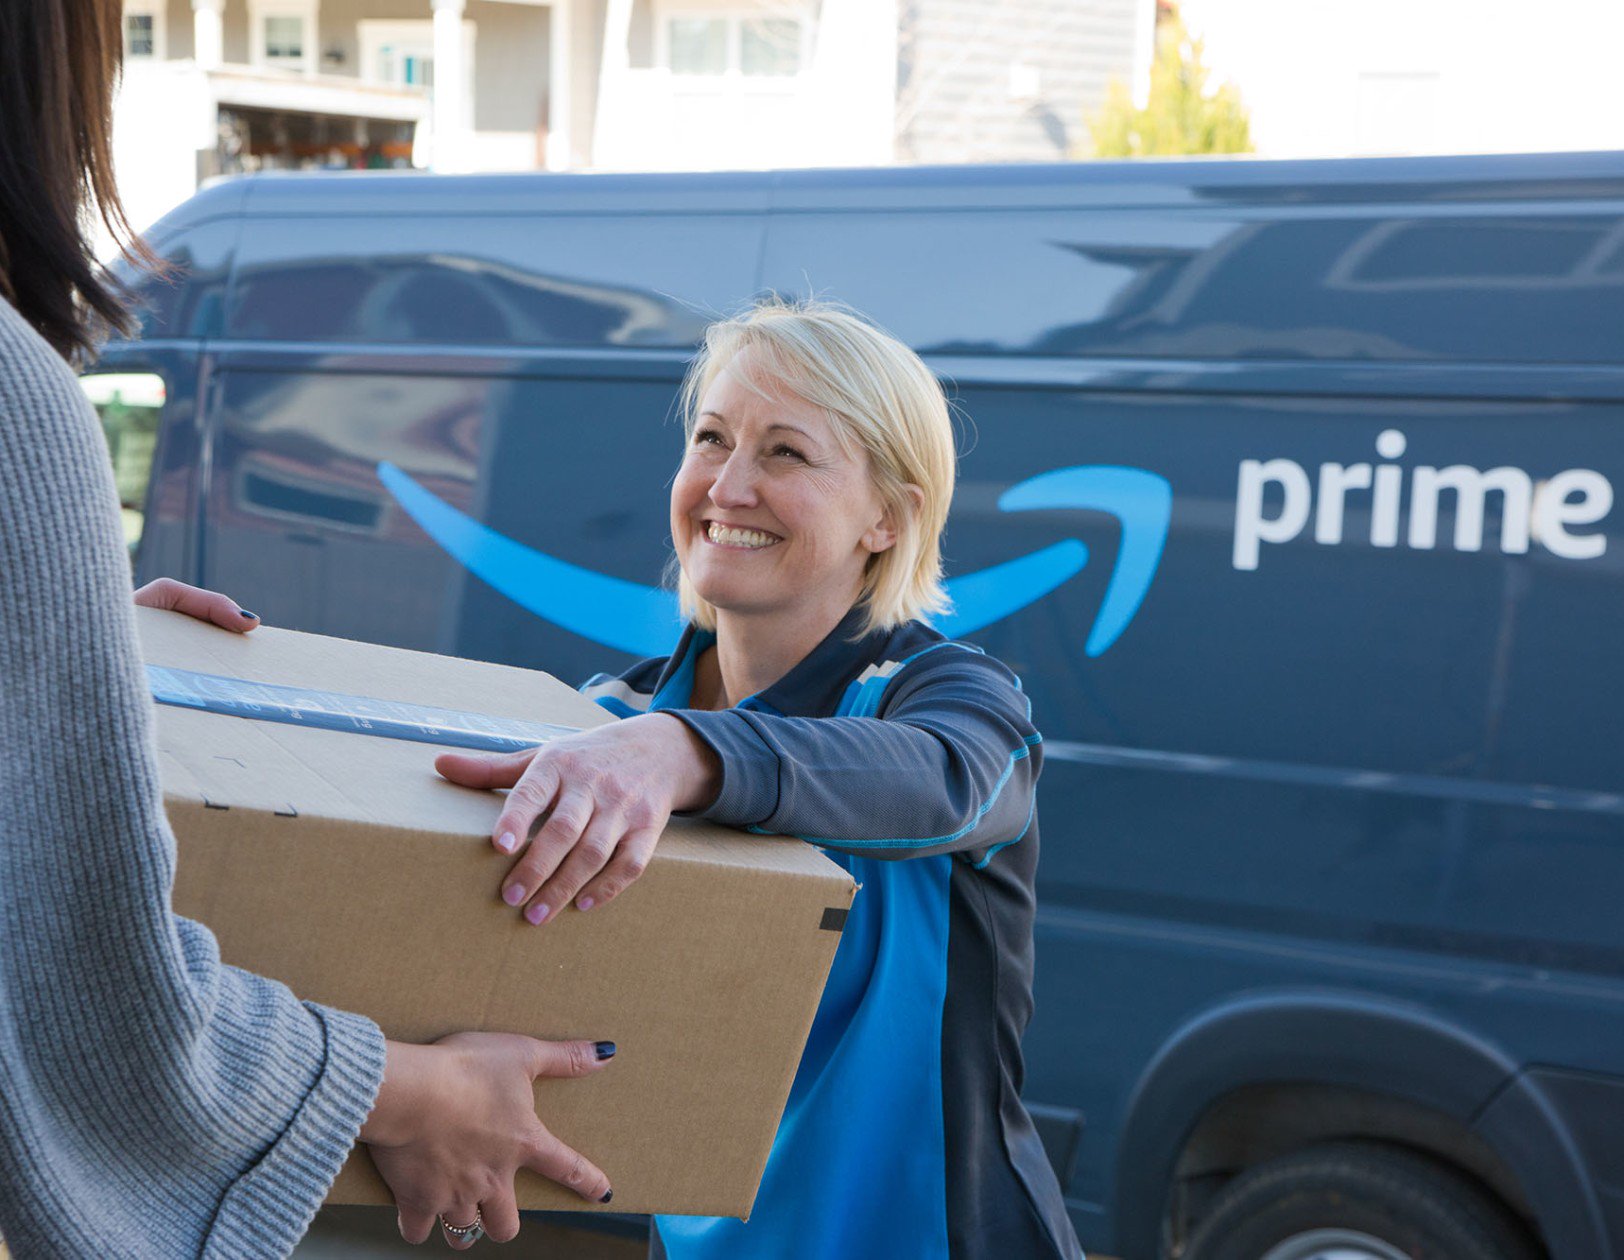 News on X: Others are trying to up their fast shipping game. Fact  is,  customers in thousands of cities across 44 major metropolitan  areas already have access to millions of